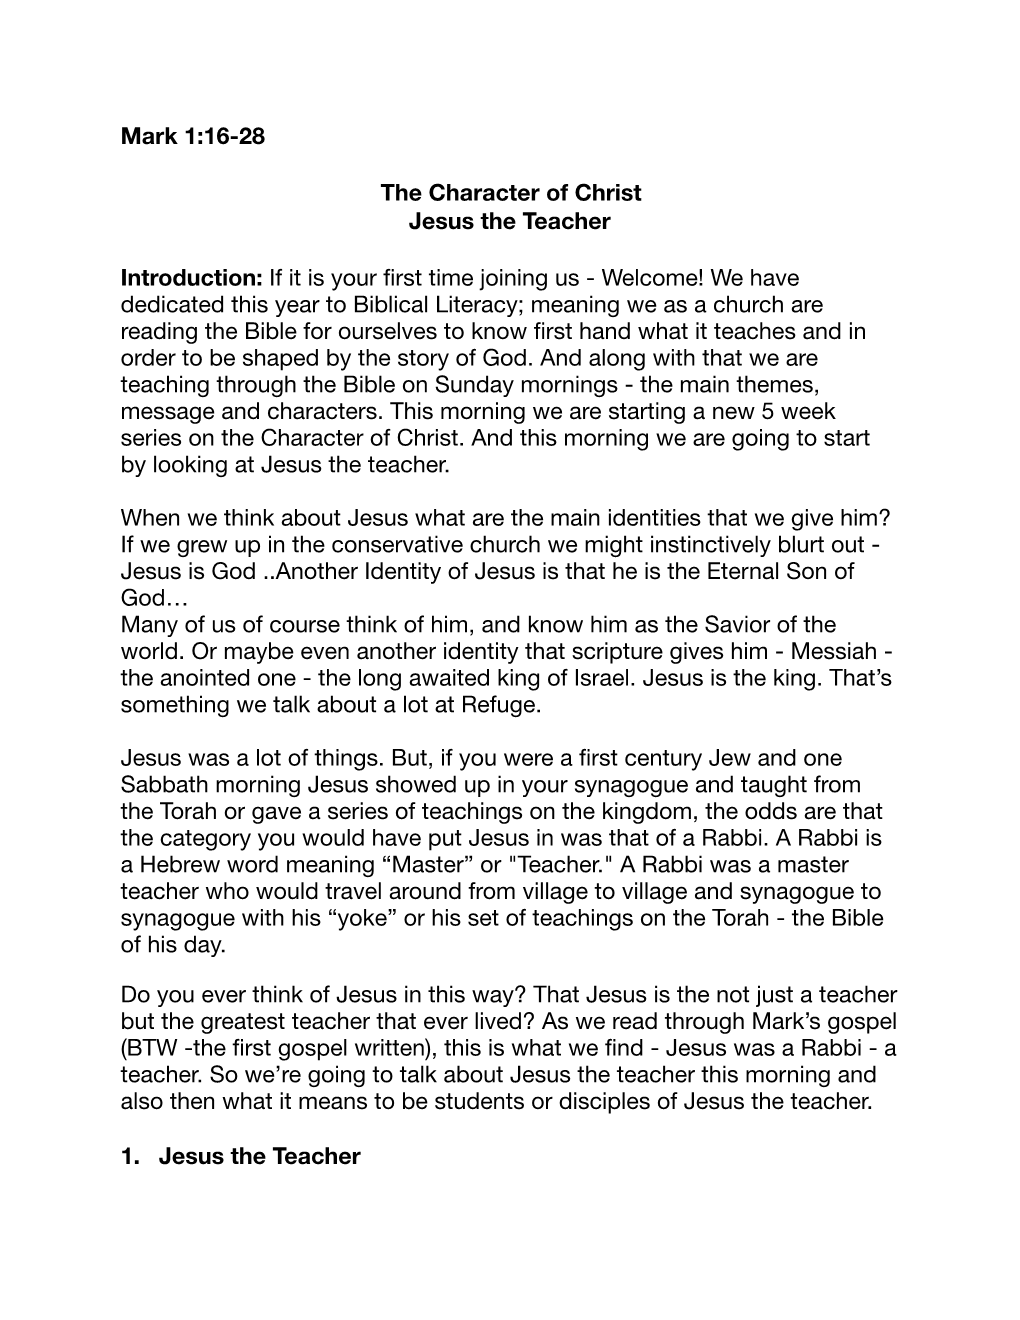 The Character of Christ (Jesus the Teacher Mark 1-16-28).Pages